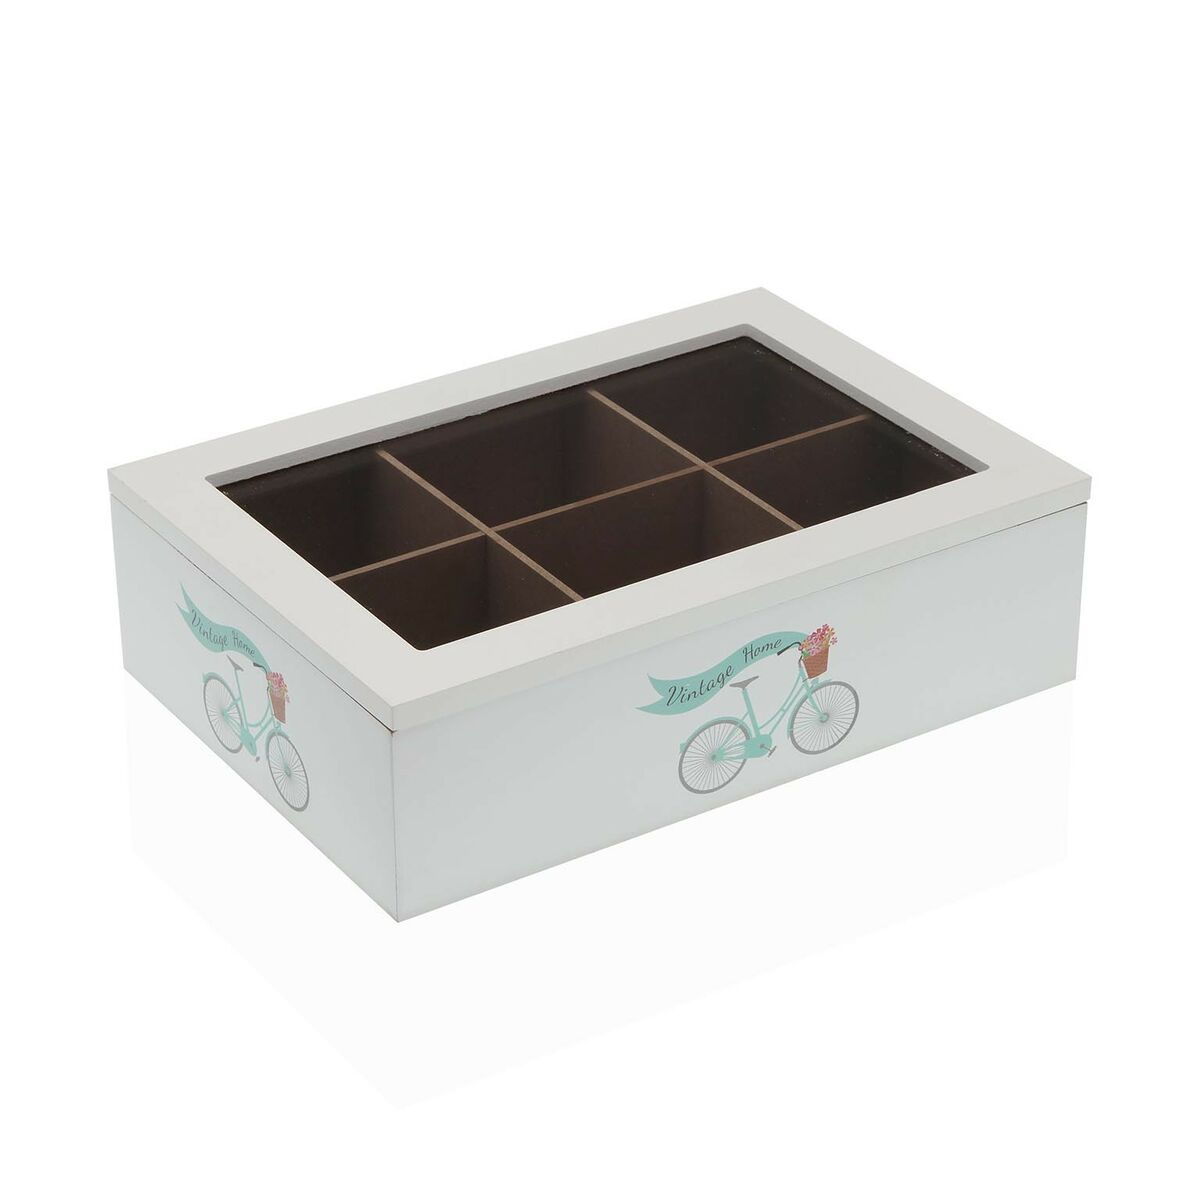 Box for Infusions Versa Bicycle Wood 17 x 7 x 24 cm